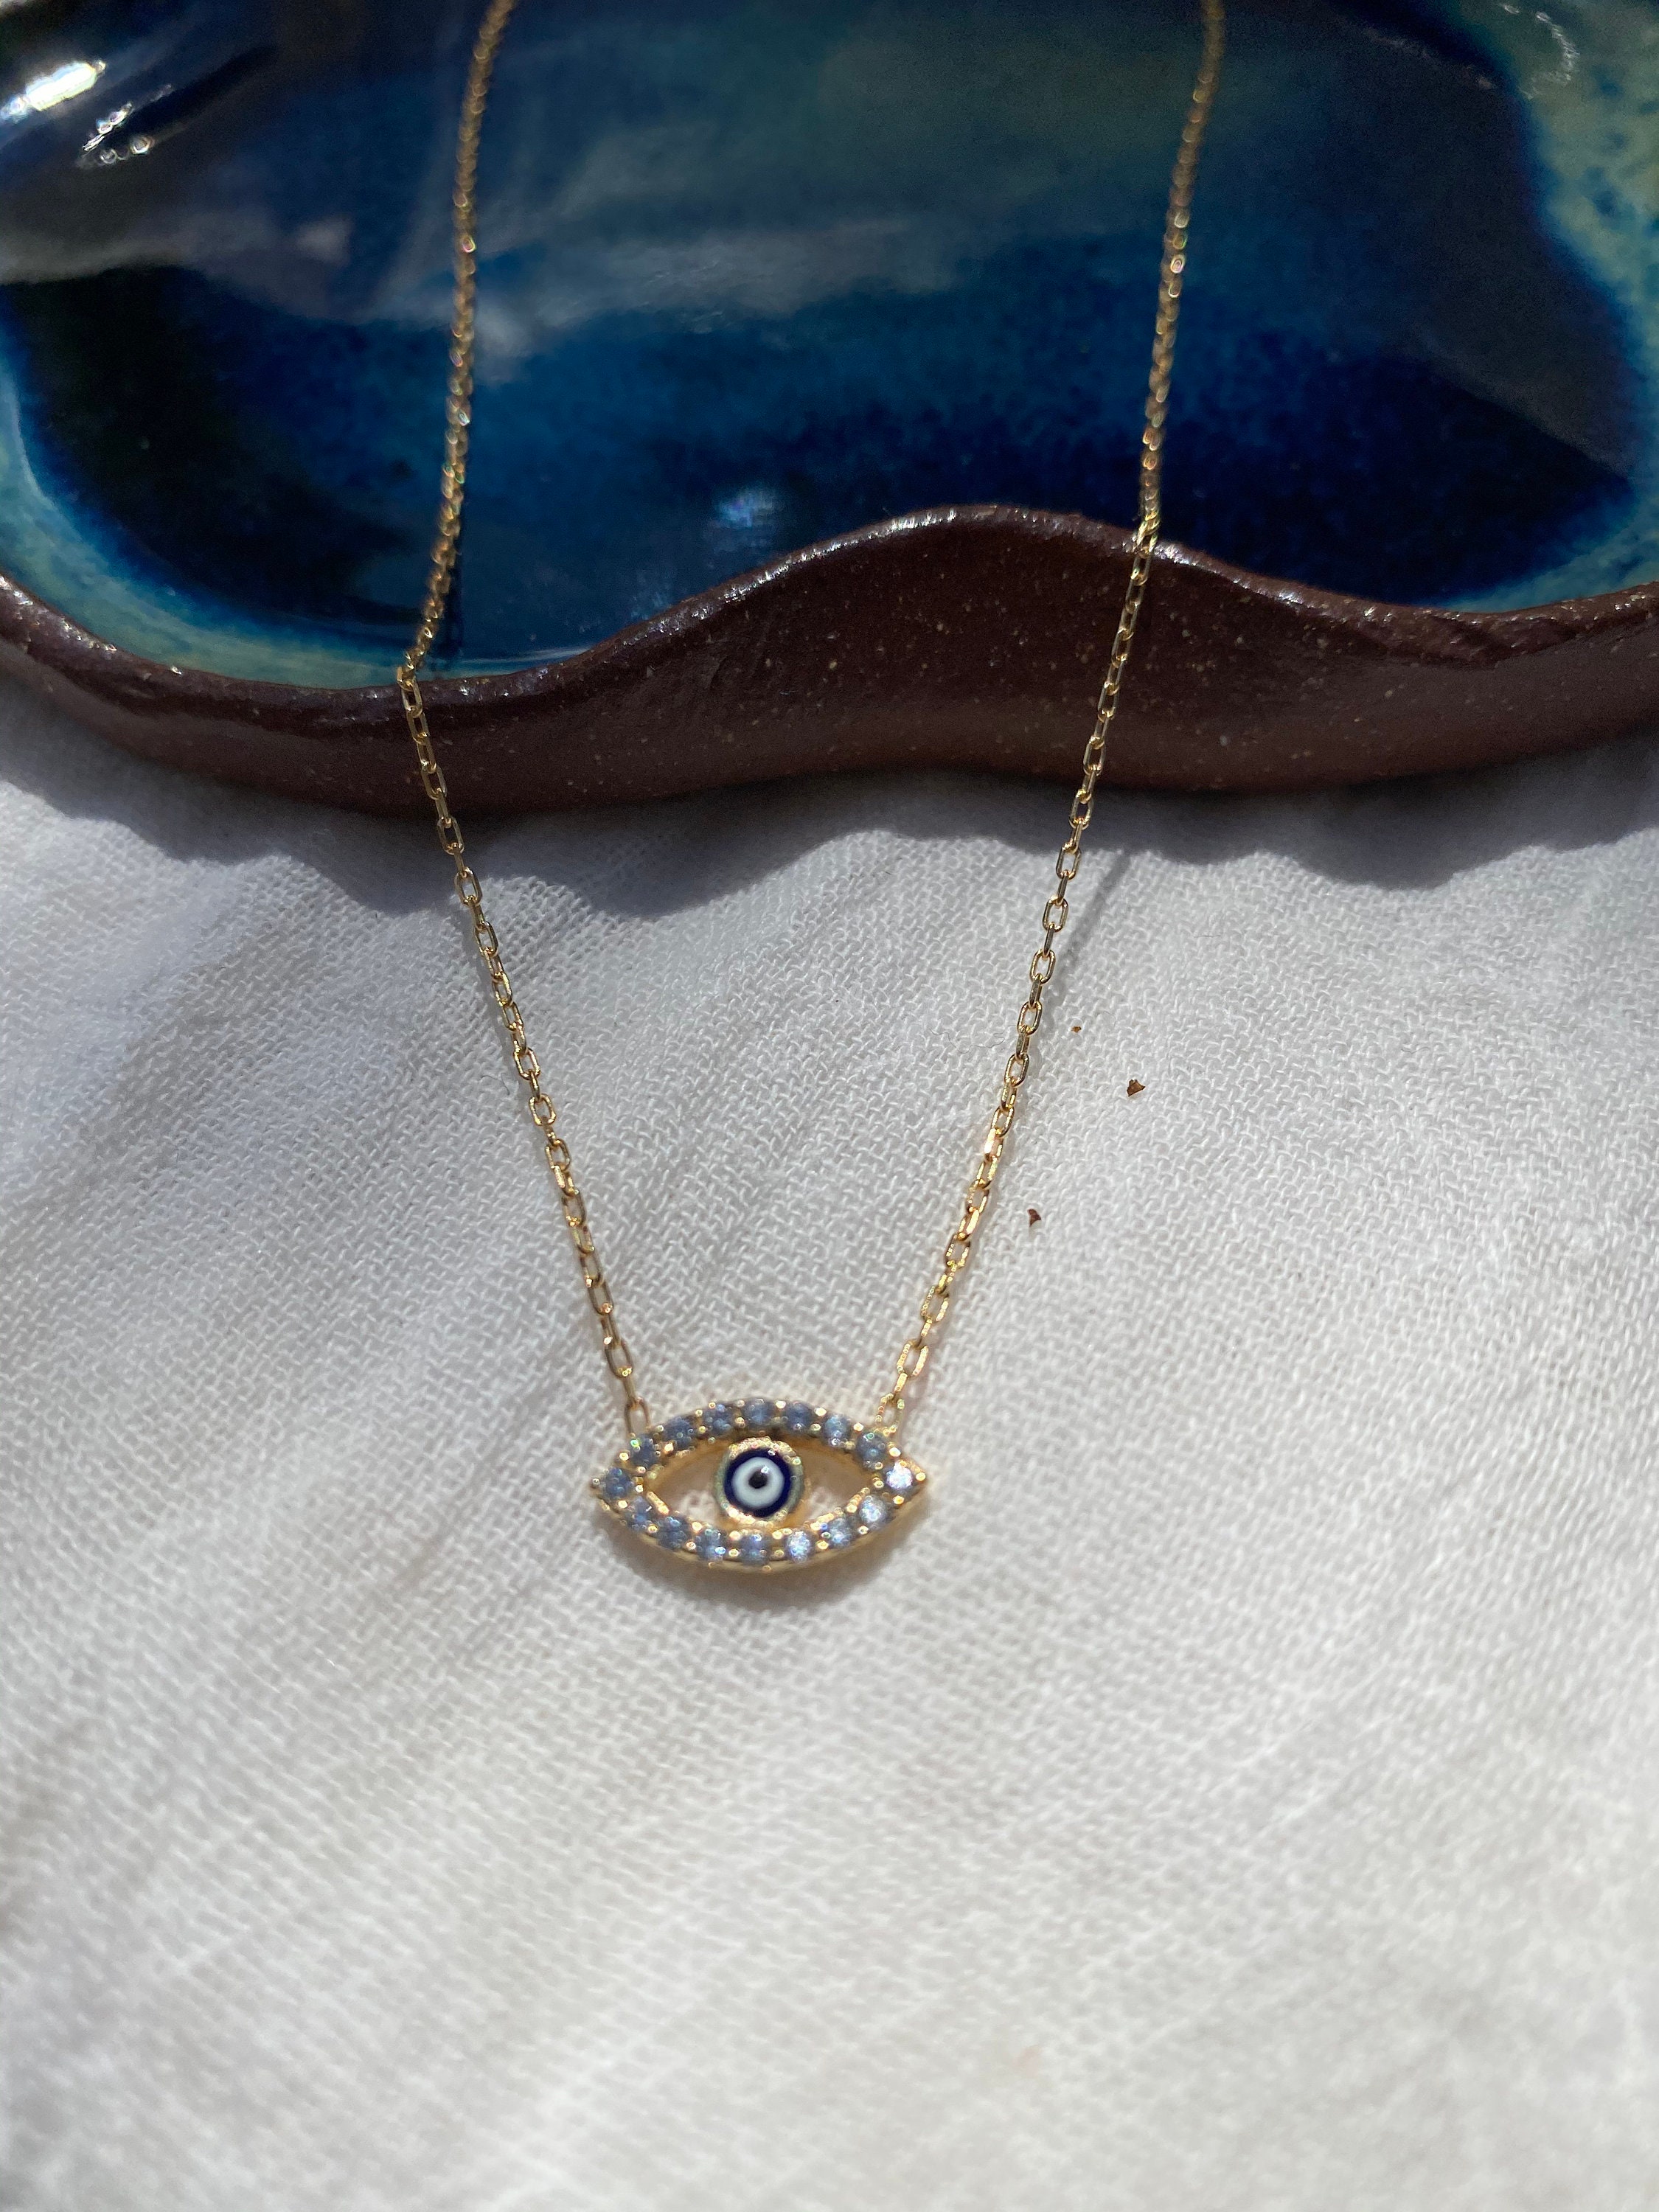 14k Solid Yellow White or Rose Gold Fine Jewelry Nazar Protection Pendant Necklace for Women 14k Gold Circle Evil Eye Necklace